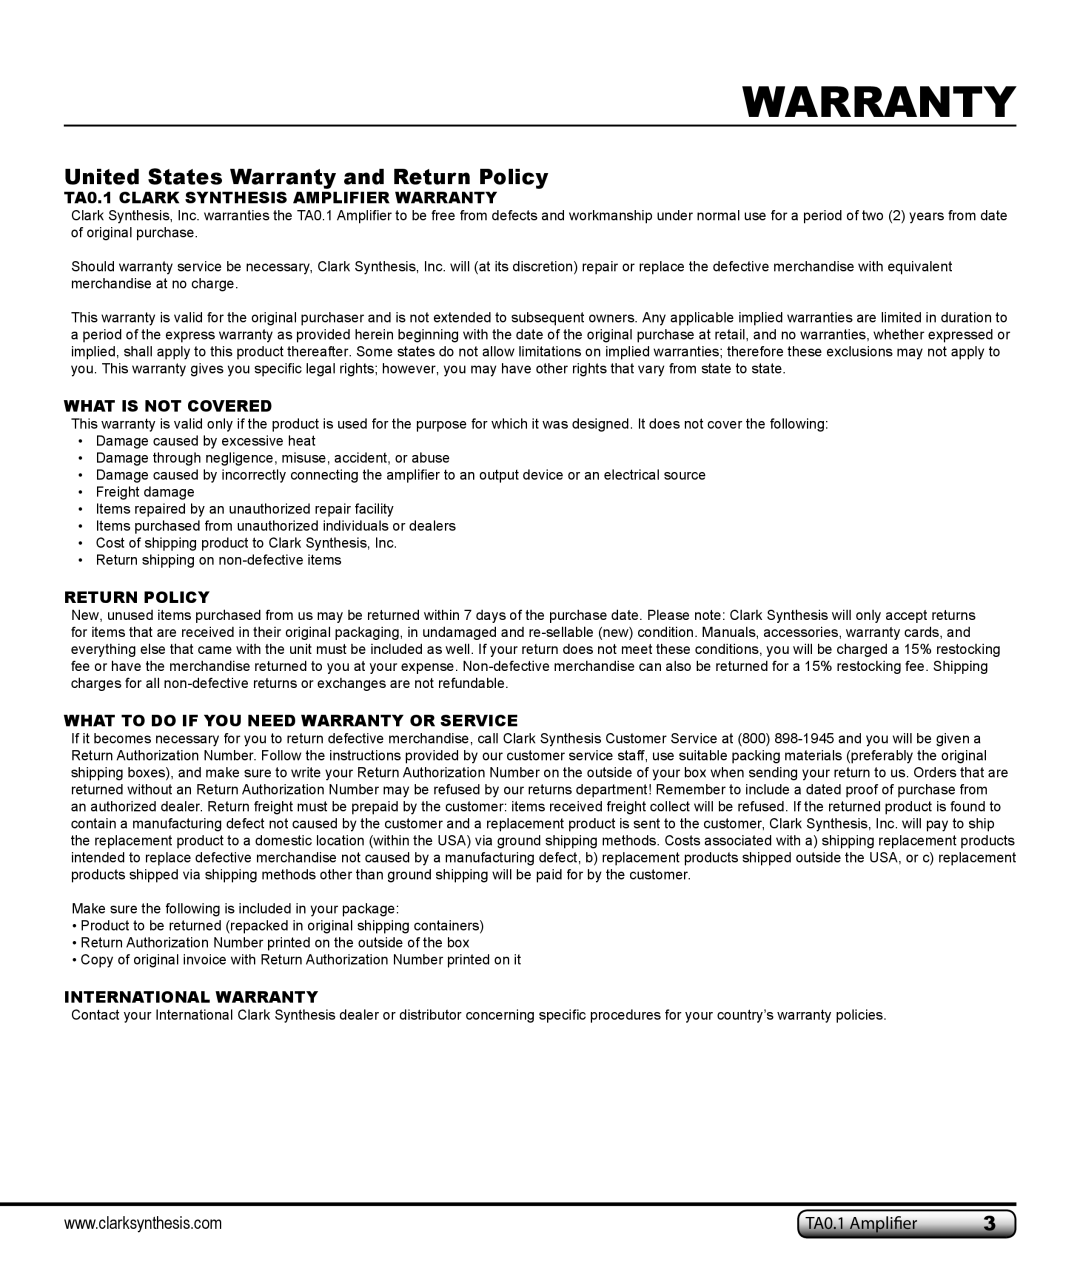 Clark Synthesis owner manual United States Warranty and Return Policy, TA0.1 CLARK SYNTHESIS AMPLIFIER WARRANTY 